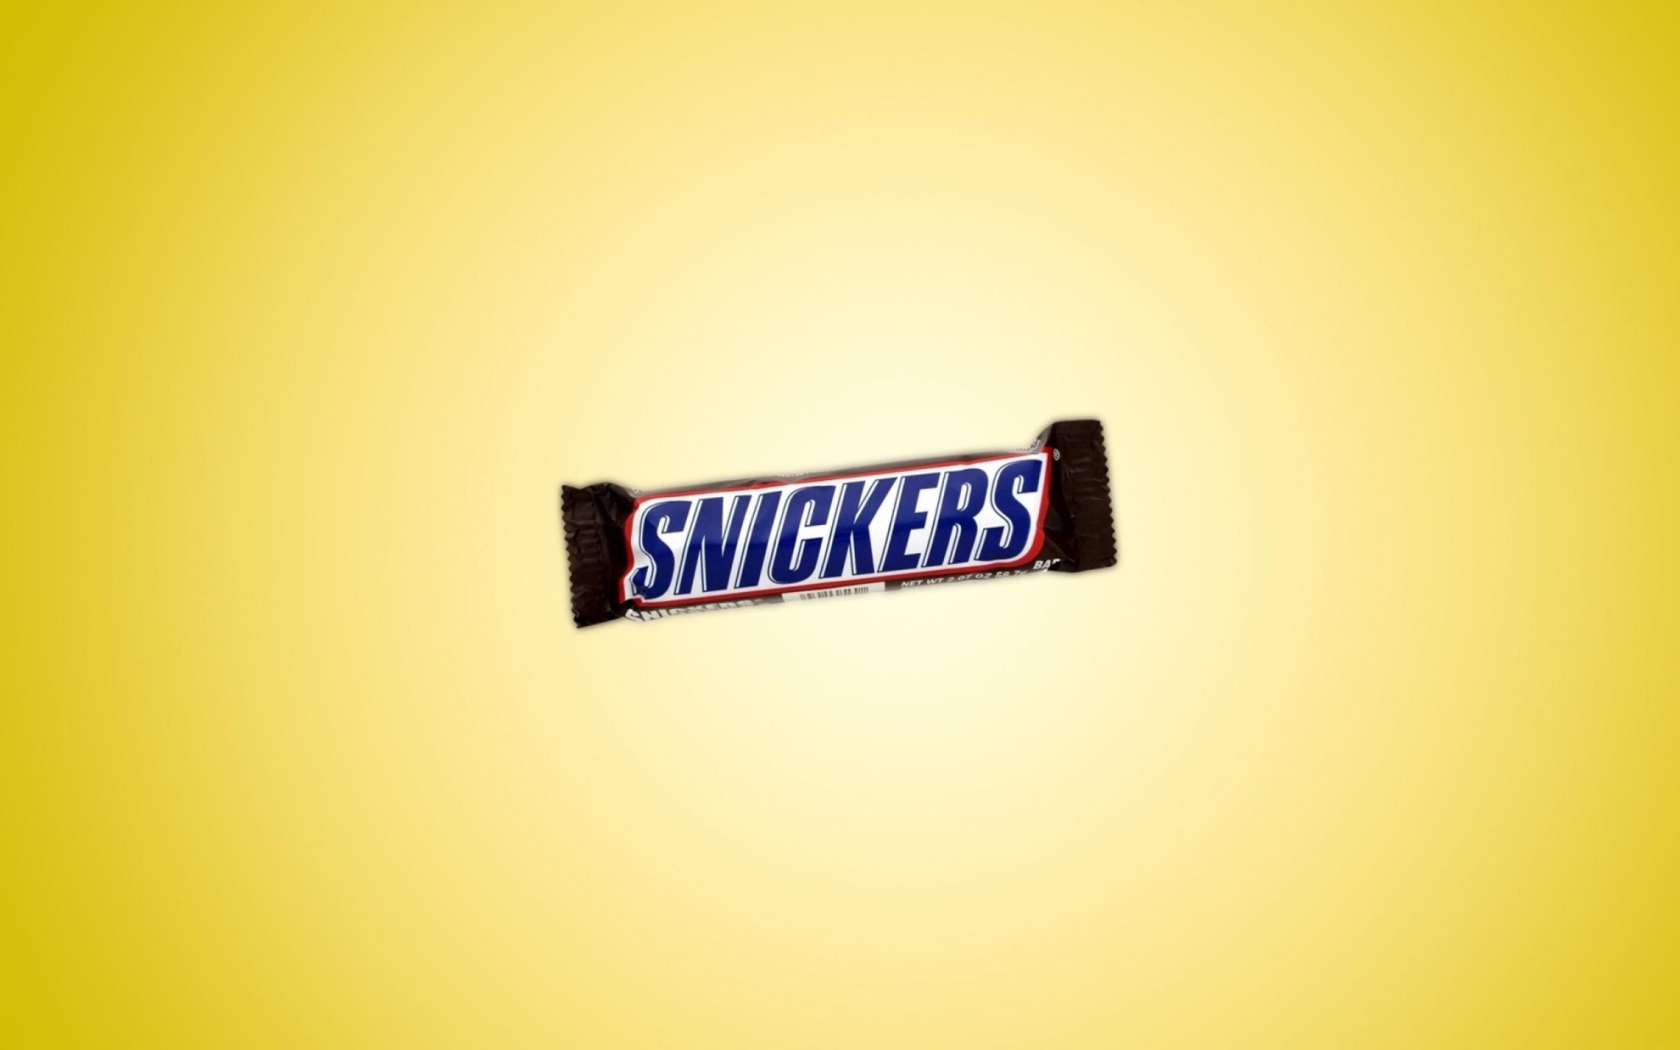 Snickers Chocolate wallpaper 1680x1050